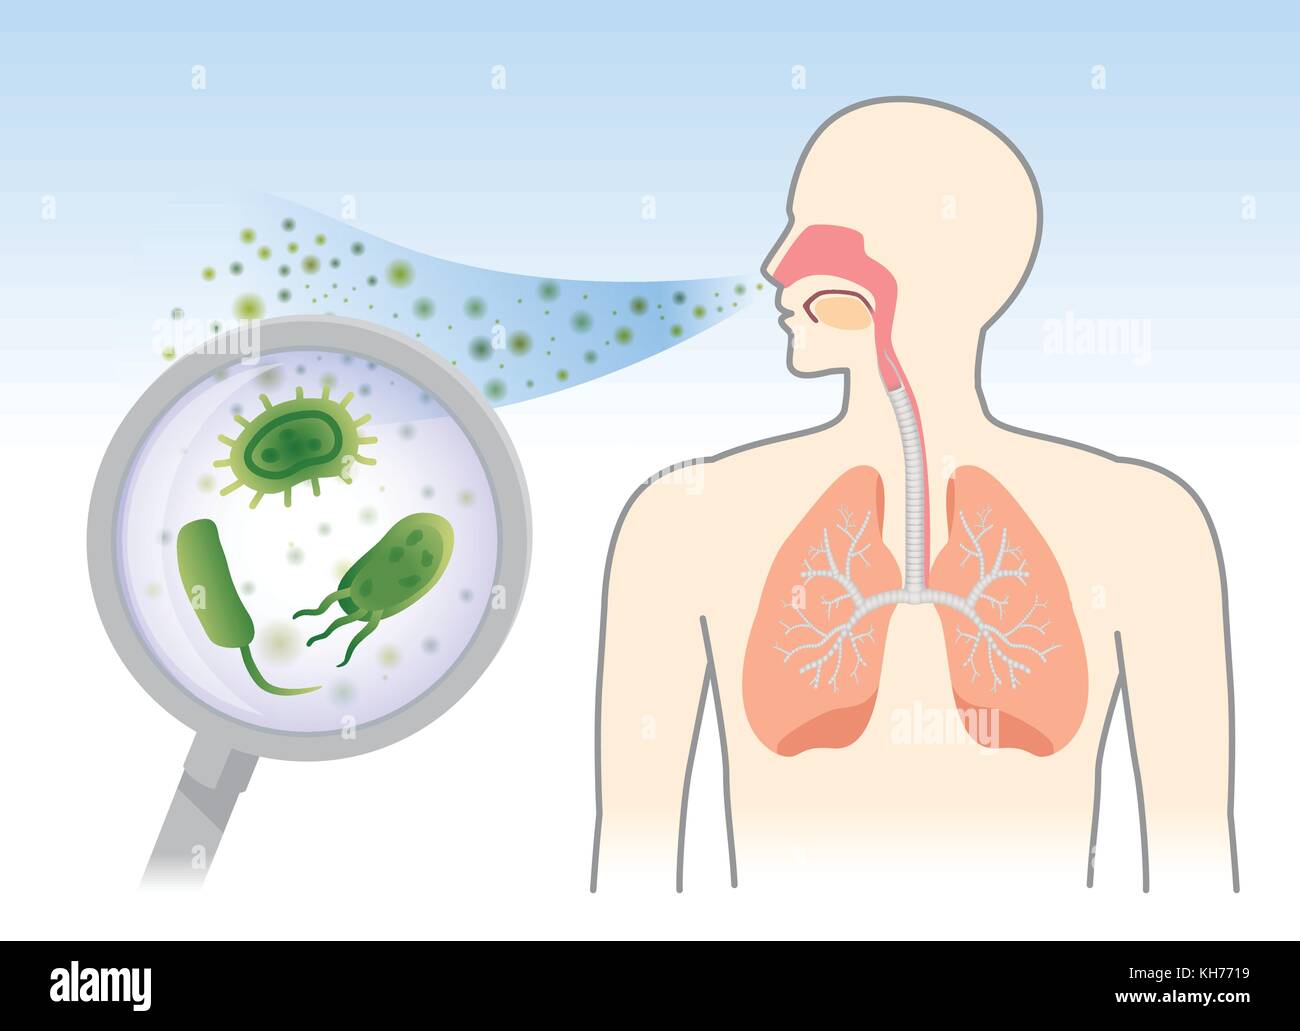 Looking Bacteria and Fungi into respiratory of human from breathe. Stock Vector